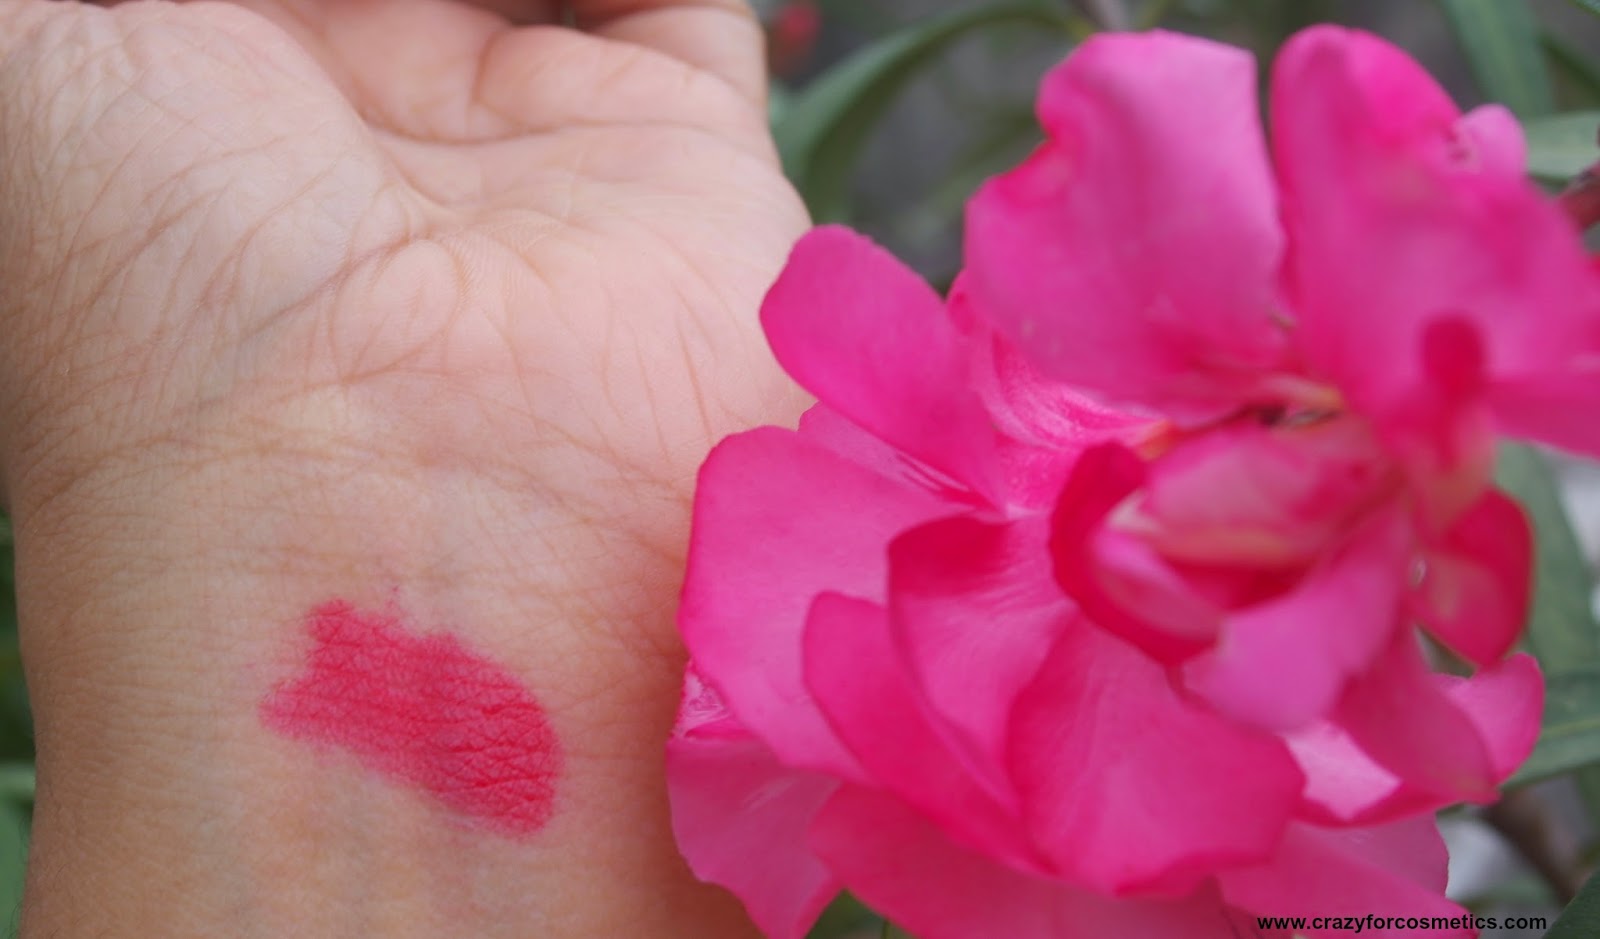 Bourjois Paris Color Boost Lip Crayon in Red Sunrise Swatches